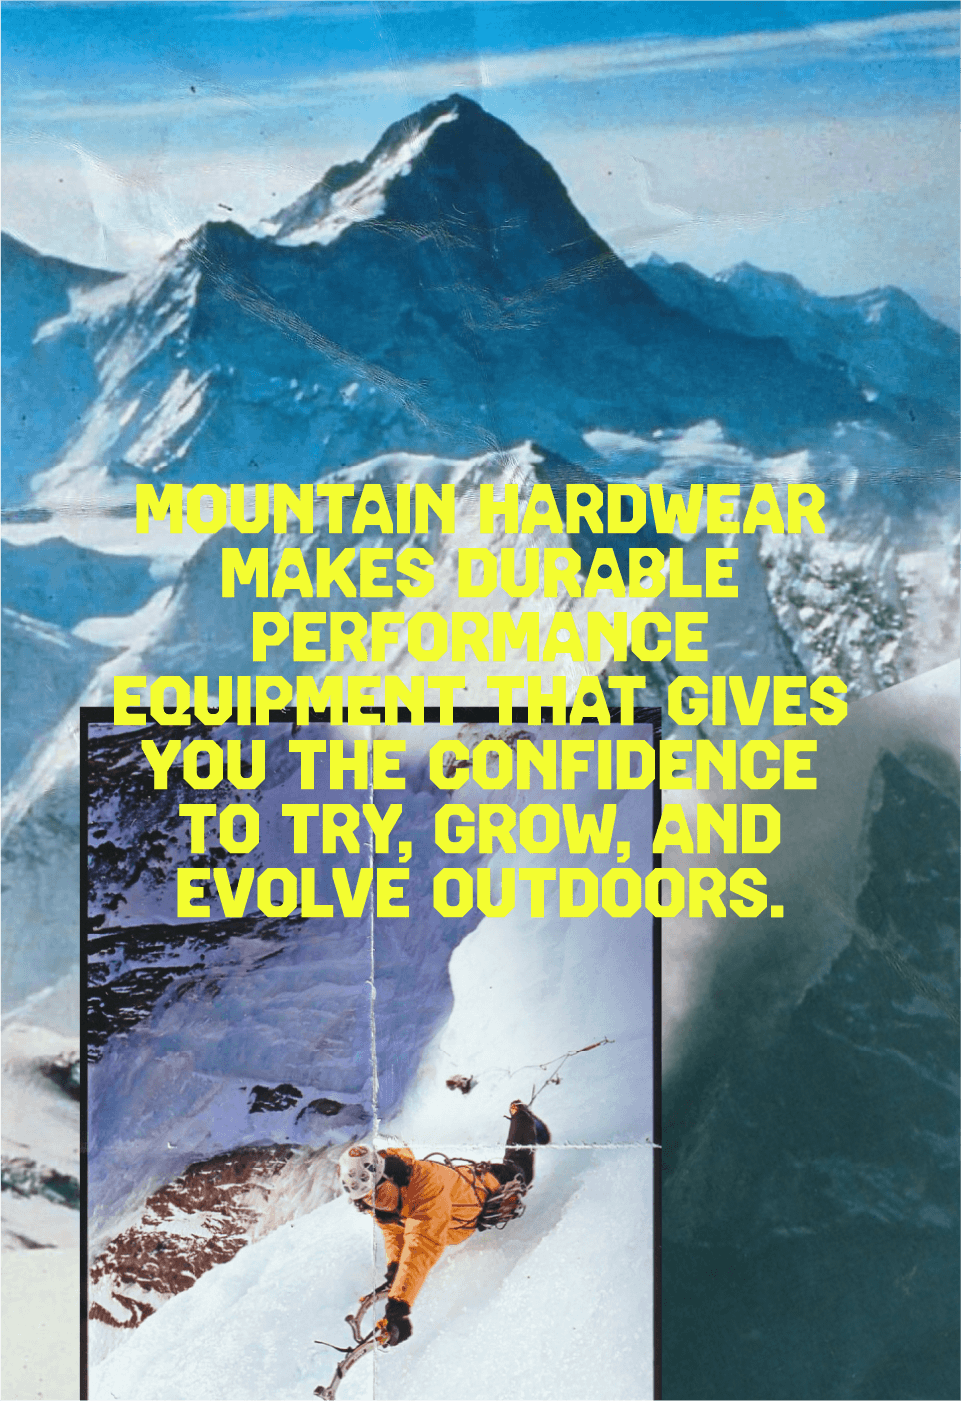 MOUNTAIN HARDWEAR MAKES DURABLE PERFORMANCE EQUIPMENT THAT GIVES YOU THE CONFIDENCE TO TRY, GROW, AND EVOLVE OUTDOORS.